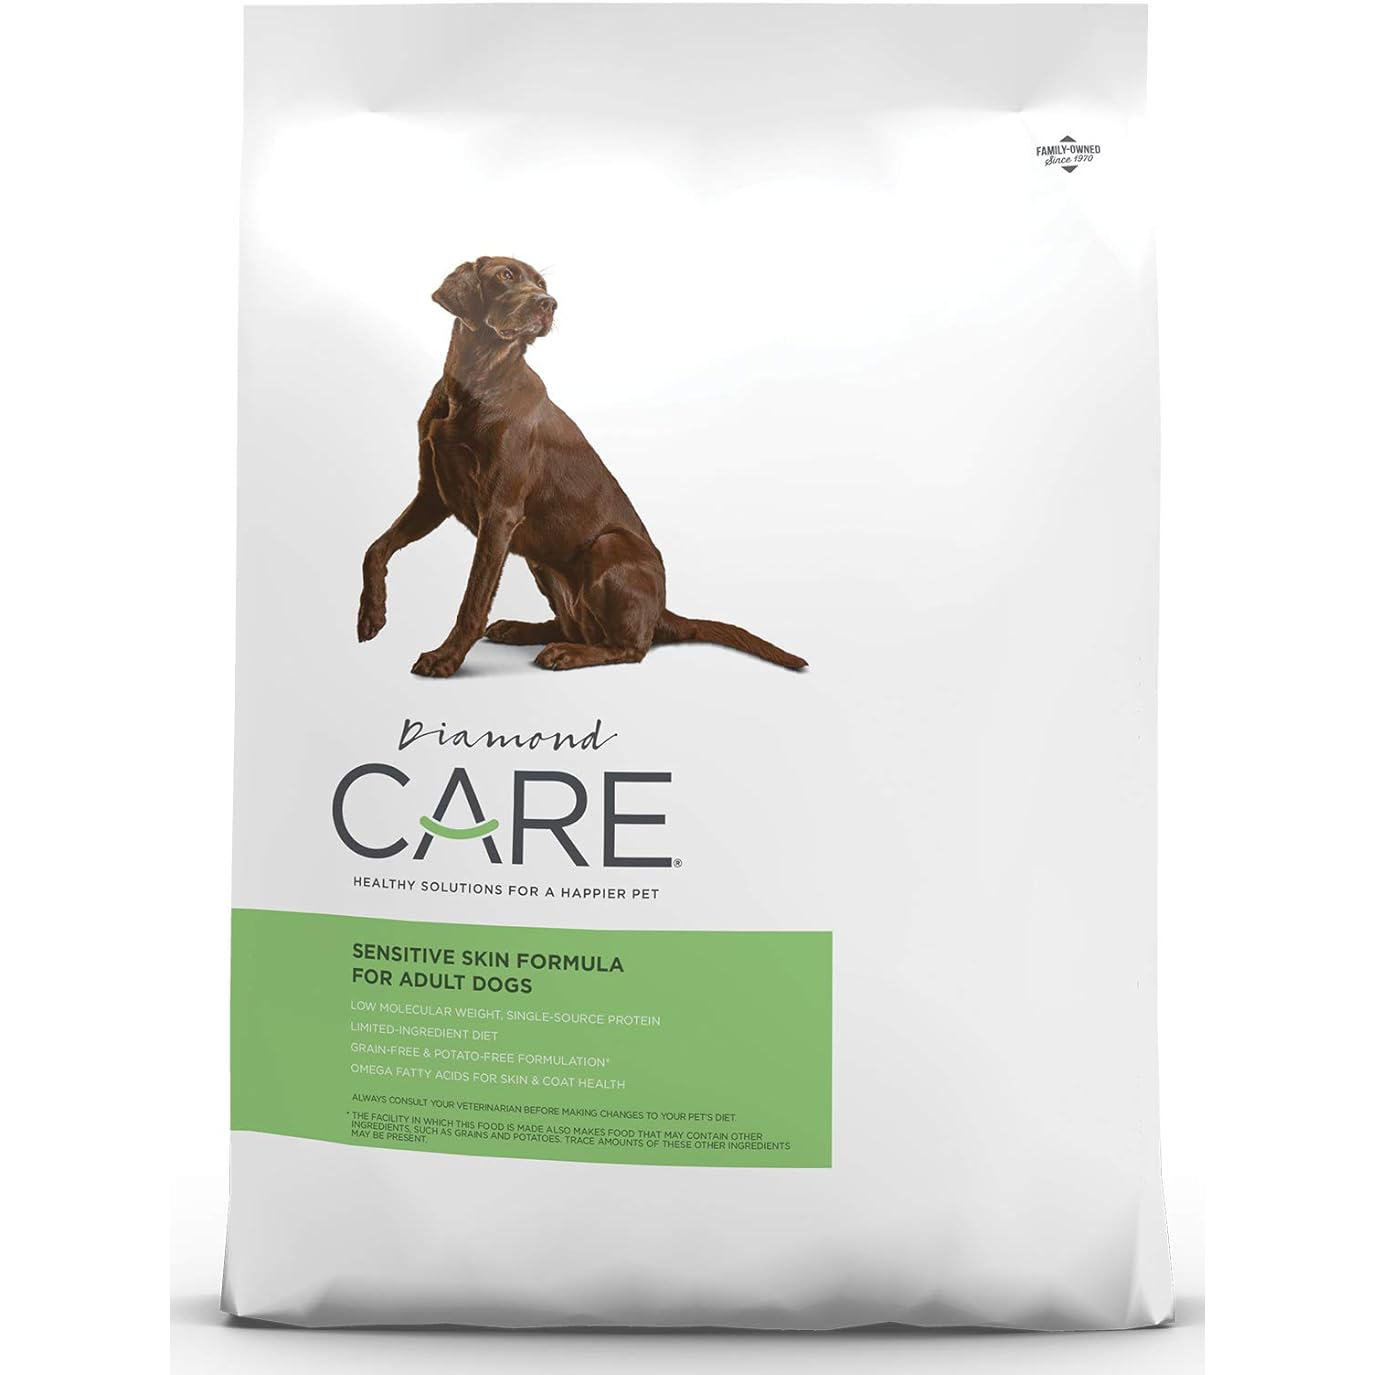 DIAMOND CARE Grain-Free Formulation Adult Dry Dog Food for Sensitive Skin Specially, Itchy Skin or Allergies Made with Hydrolyzed Protein from Salmon